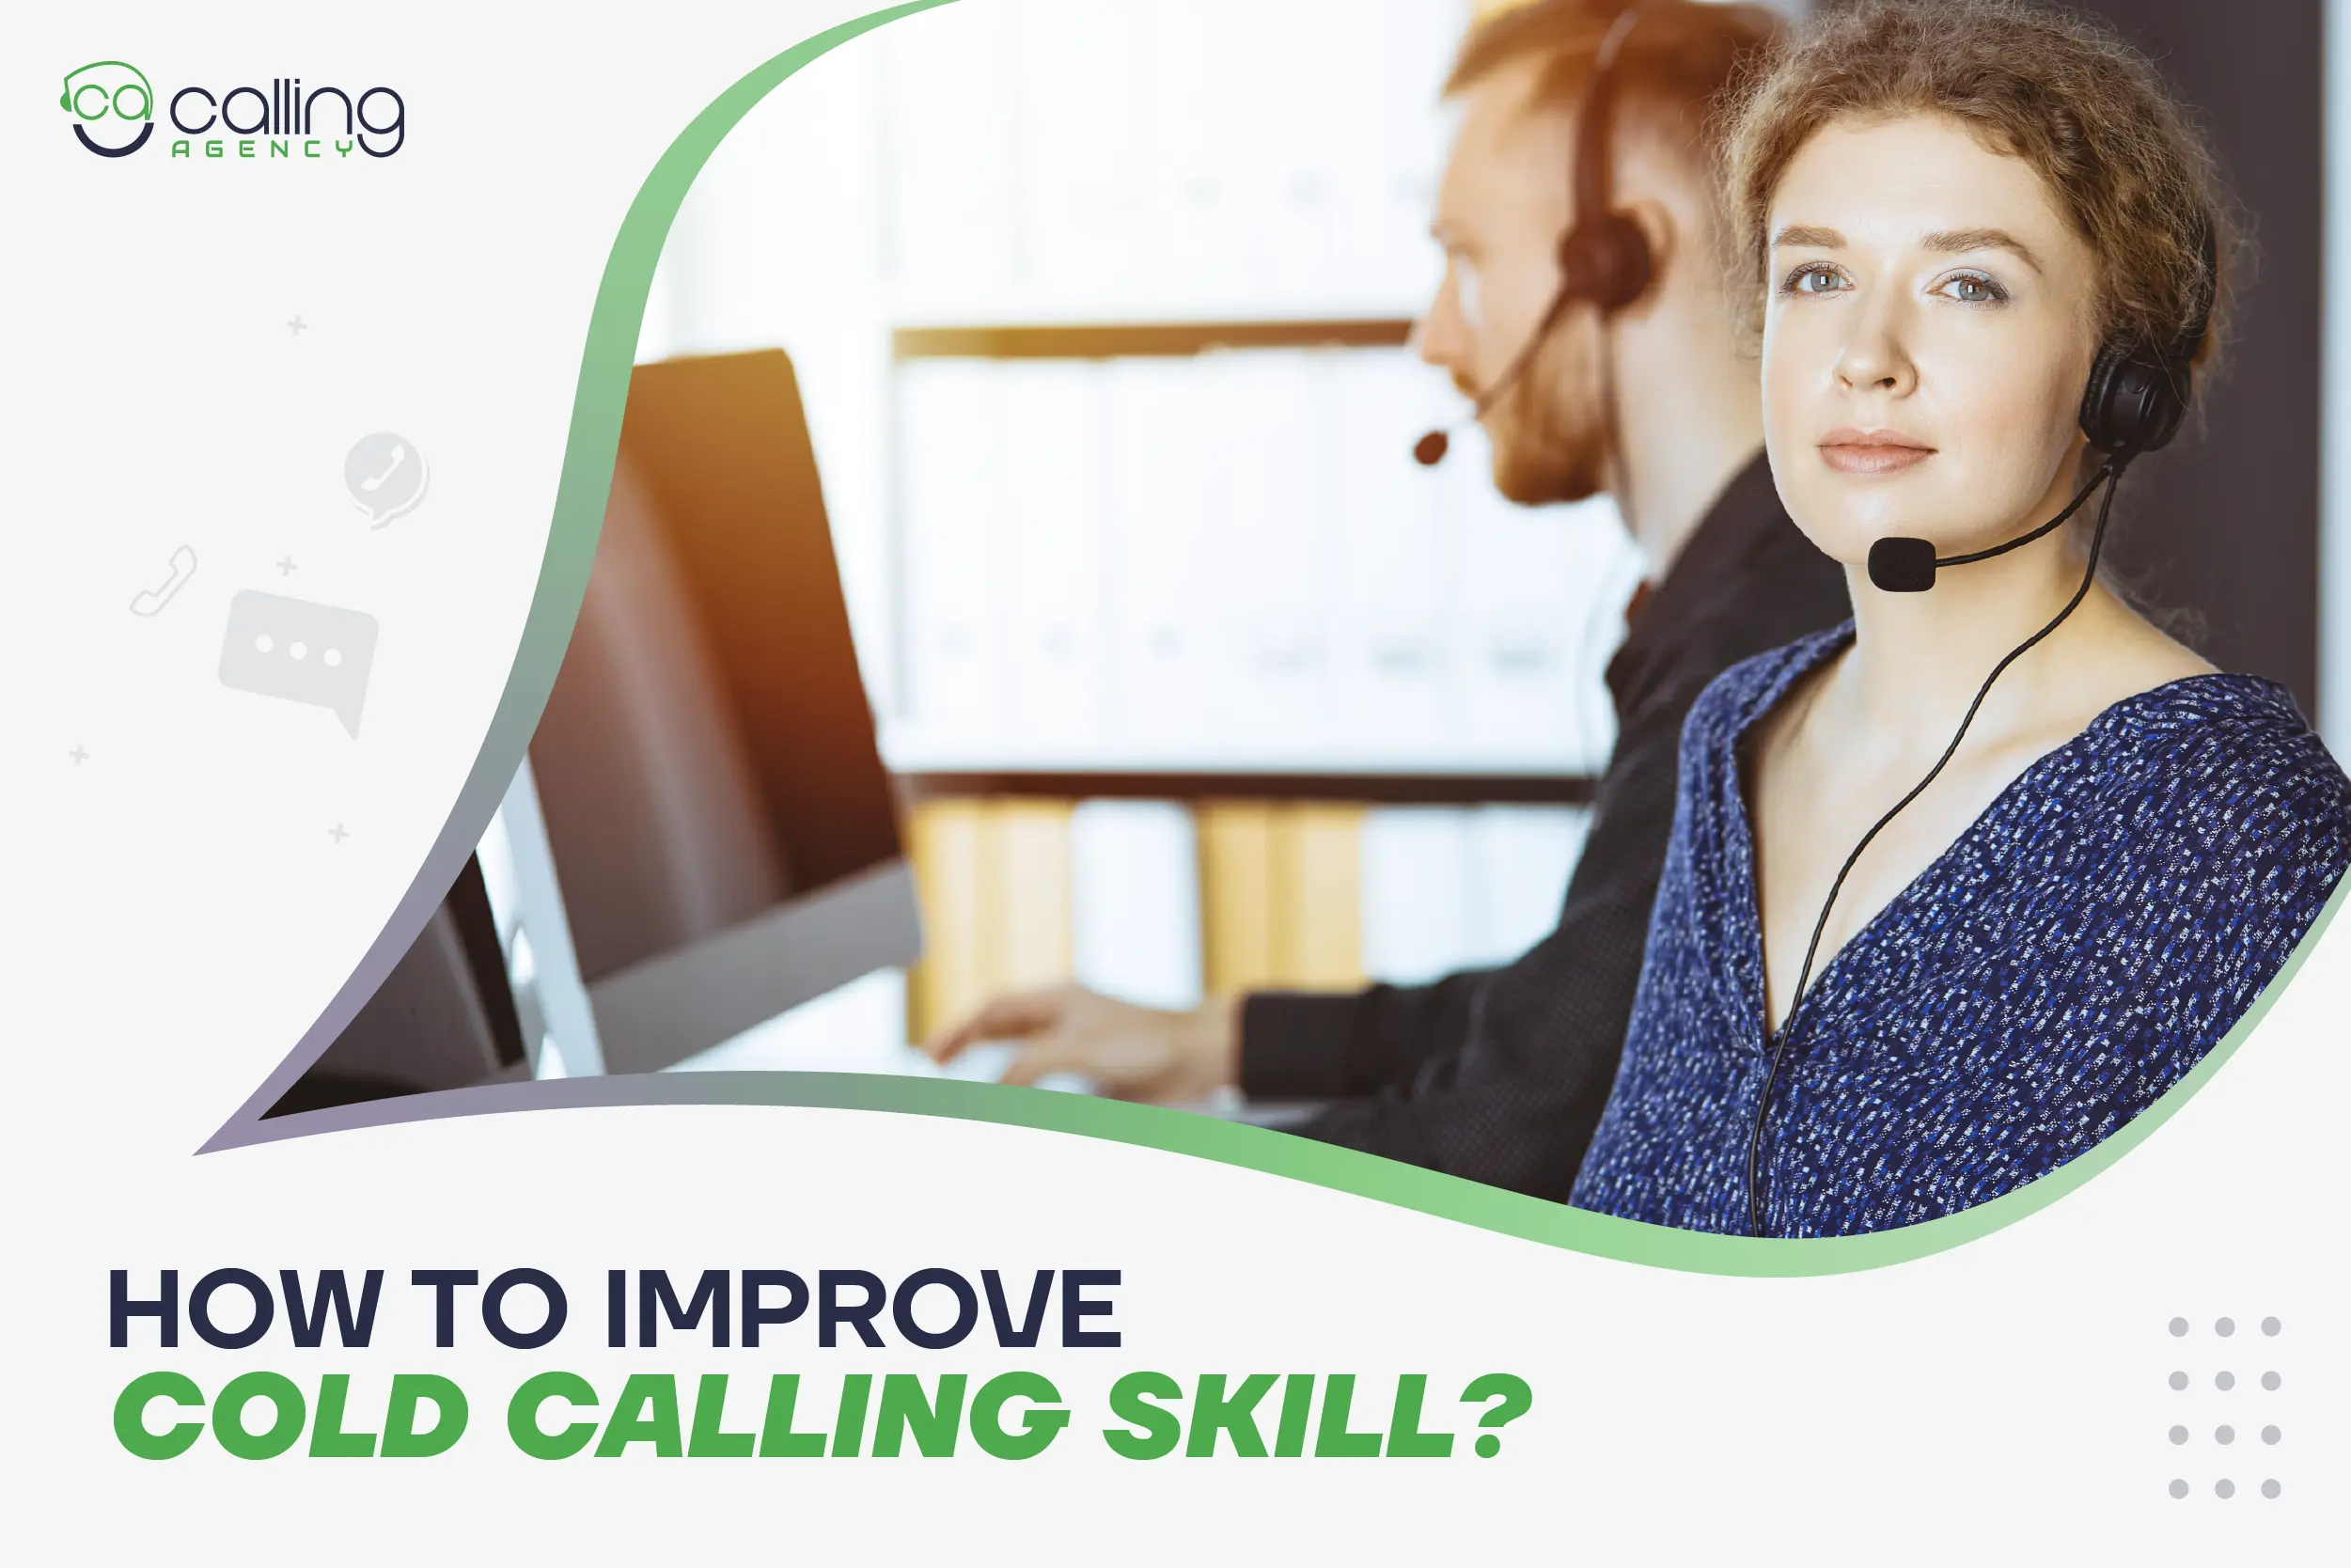 How To Improve Cold Calling Skills?